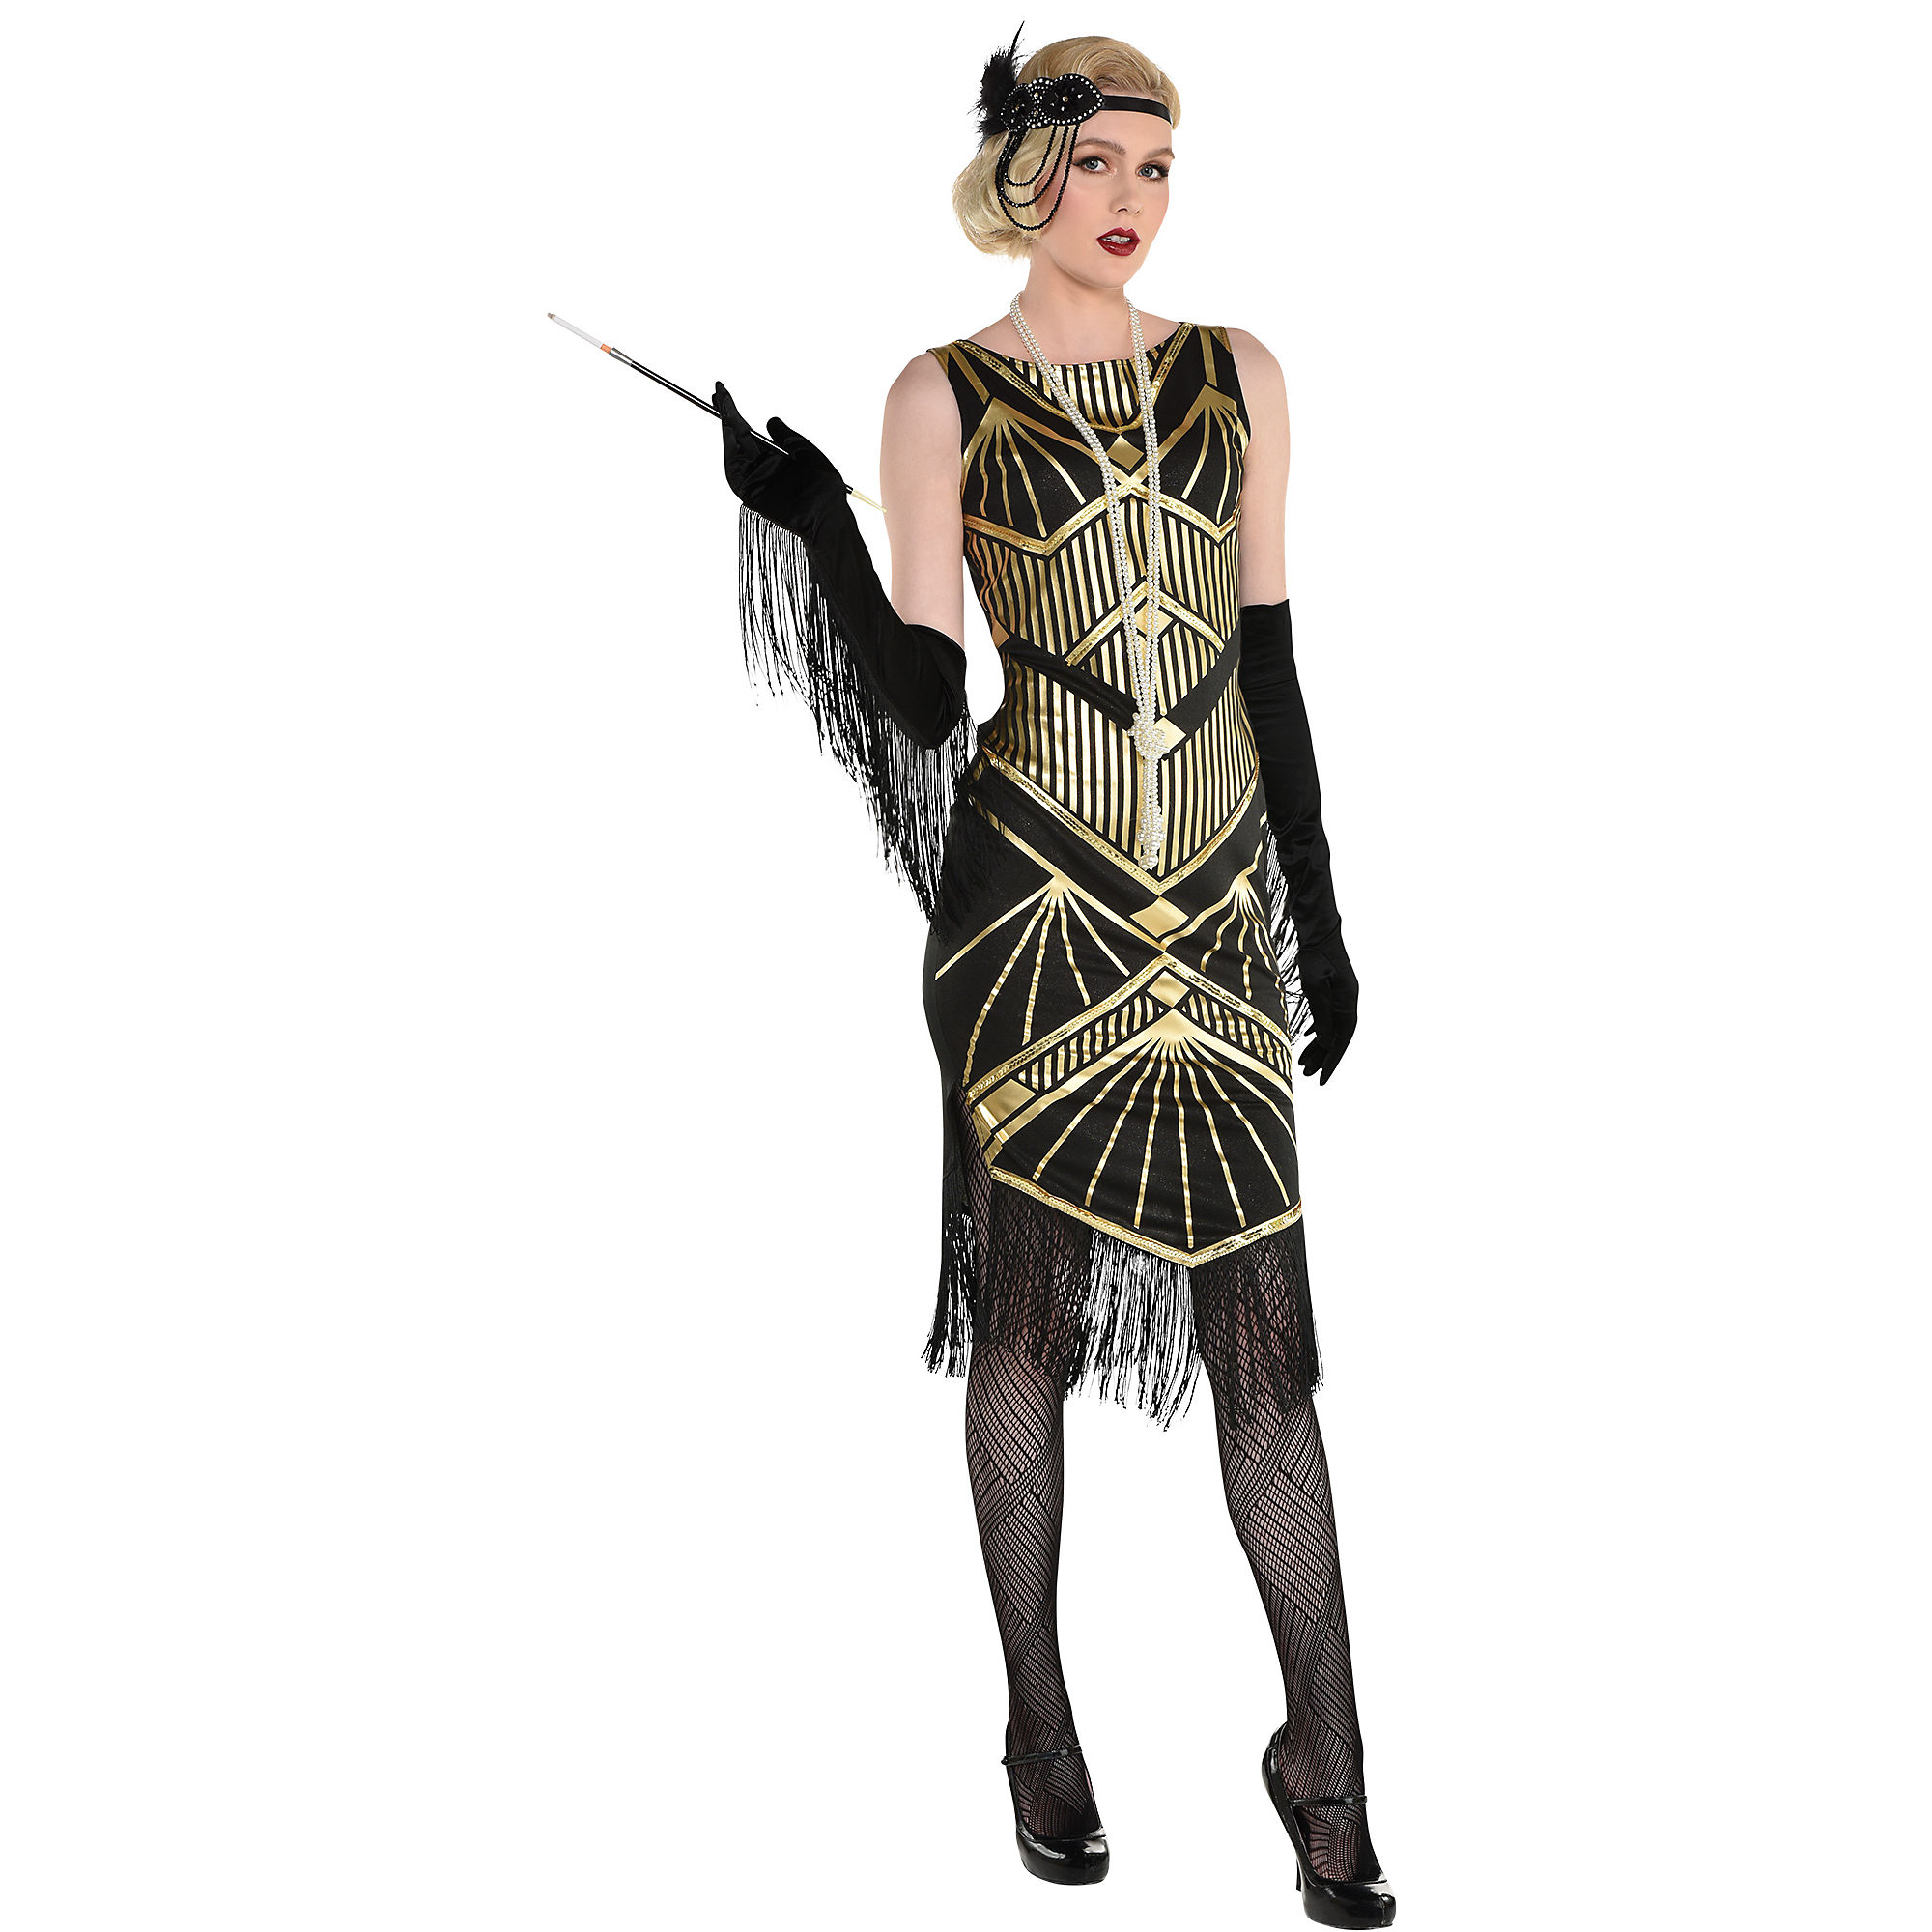 2000x2000 Party City Roaring 20s Flapper Girl Halloween Costume for Women, Black/Gold, Small, Includes Dress and Headband